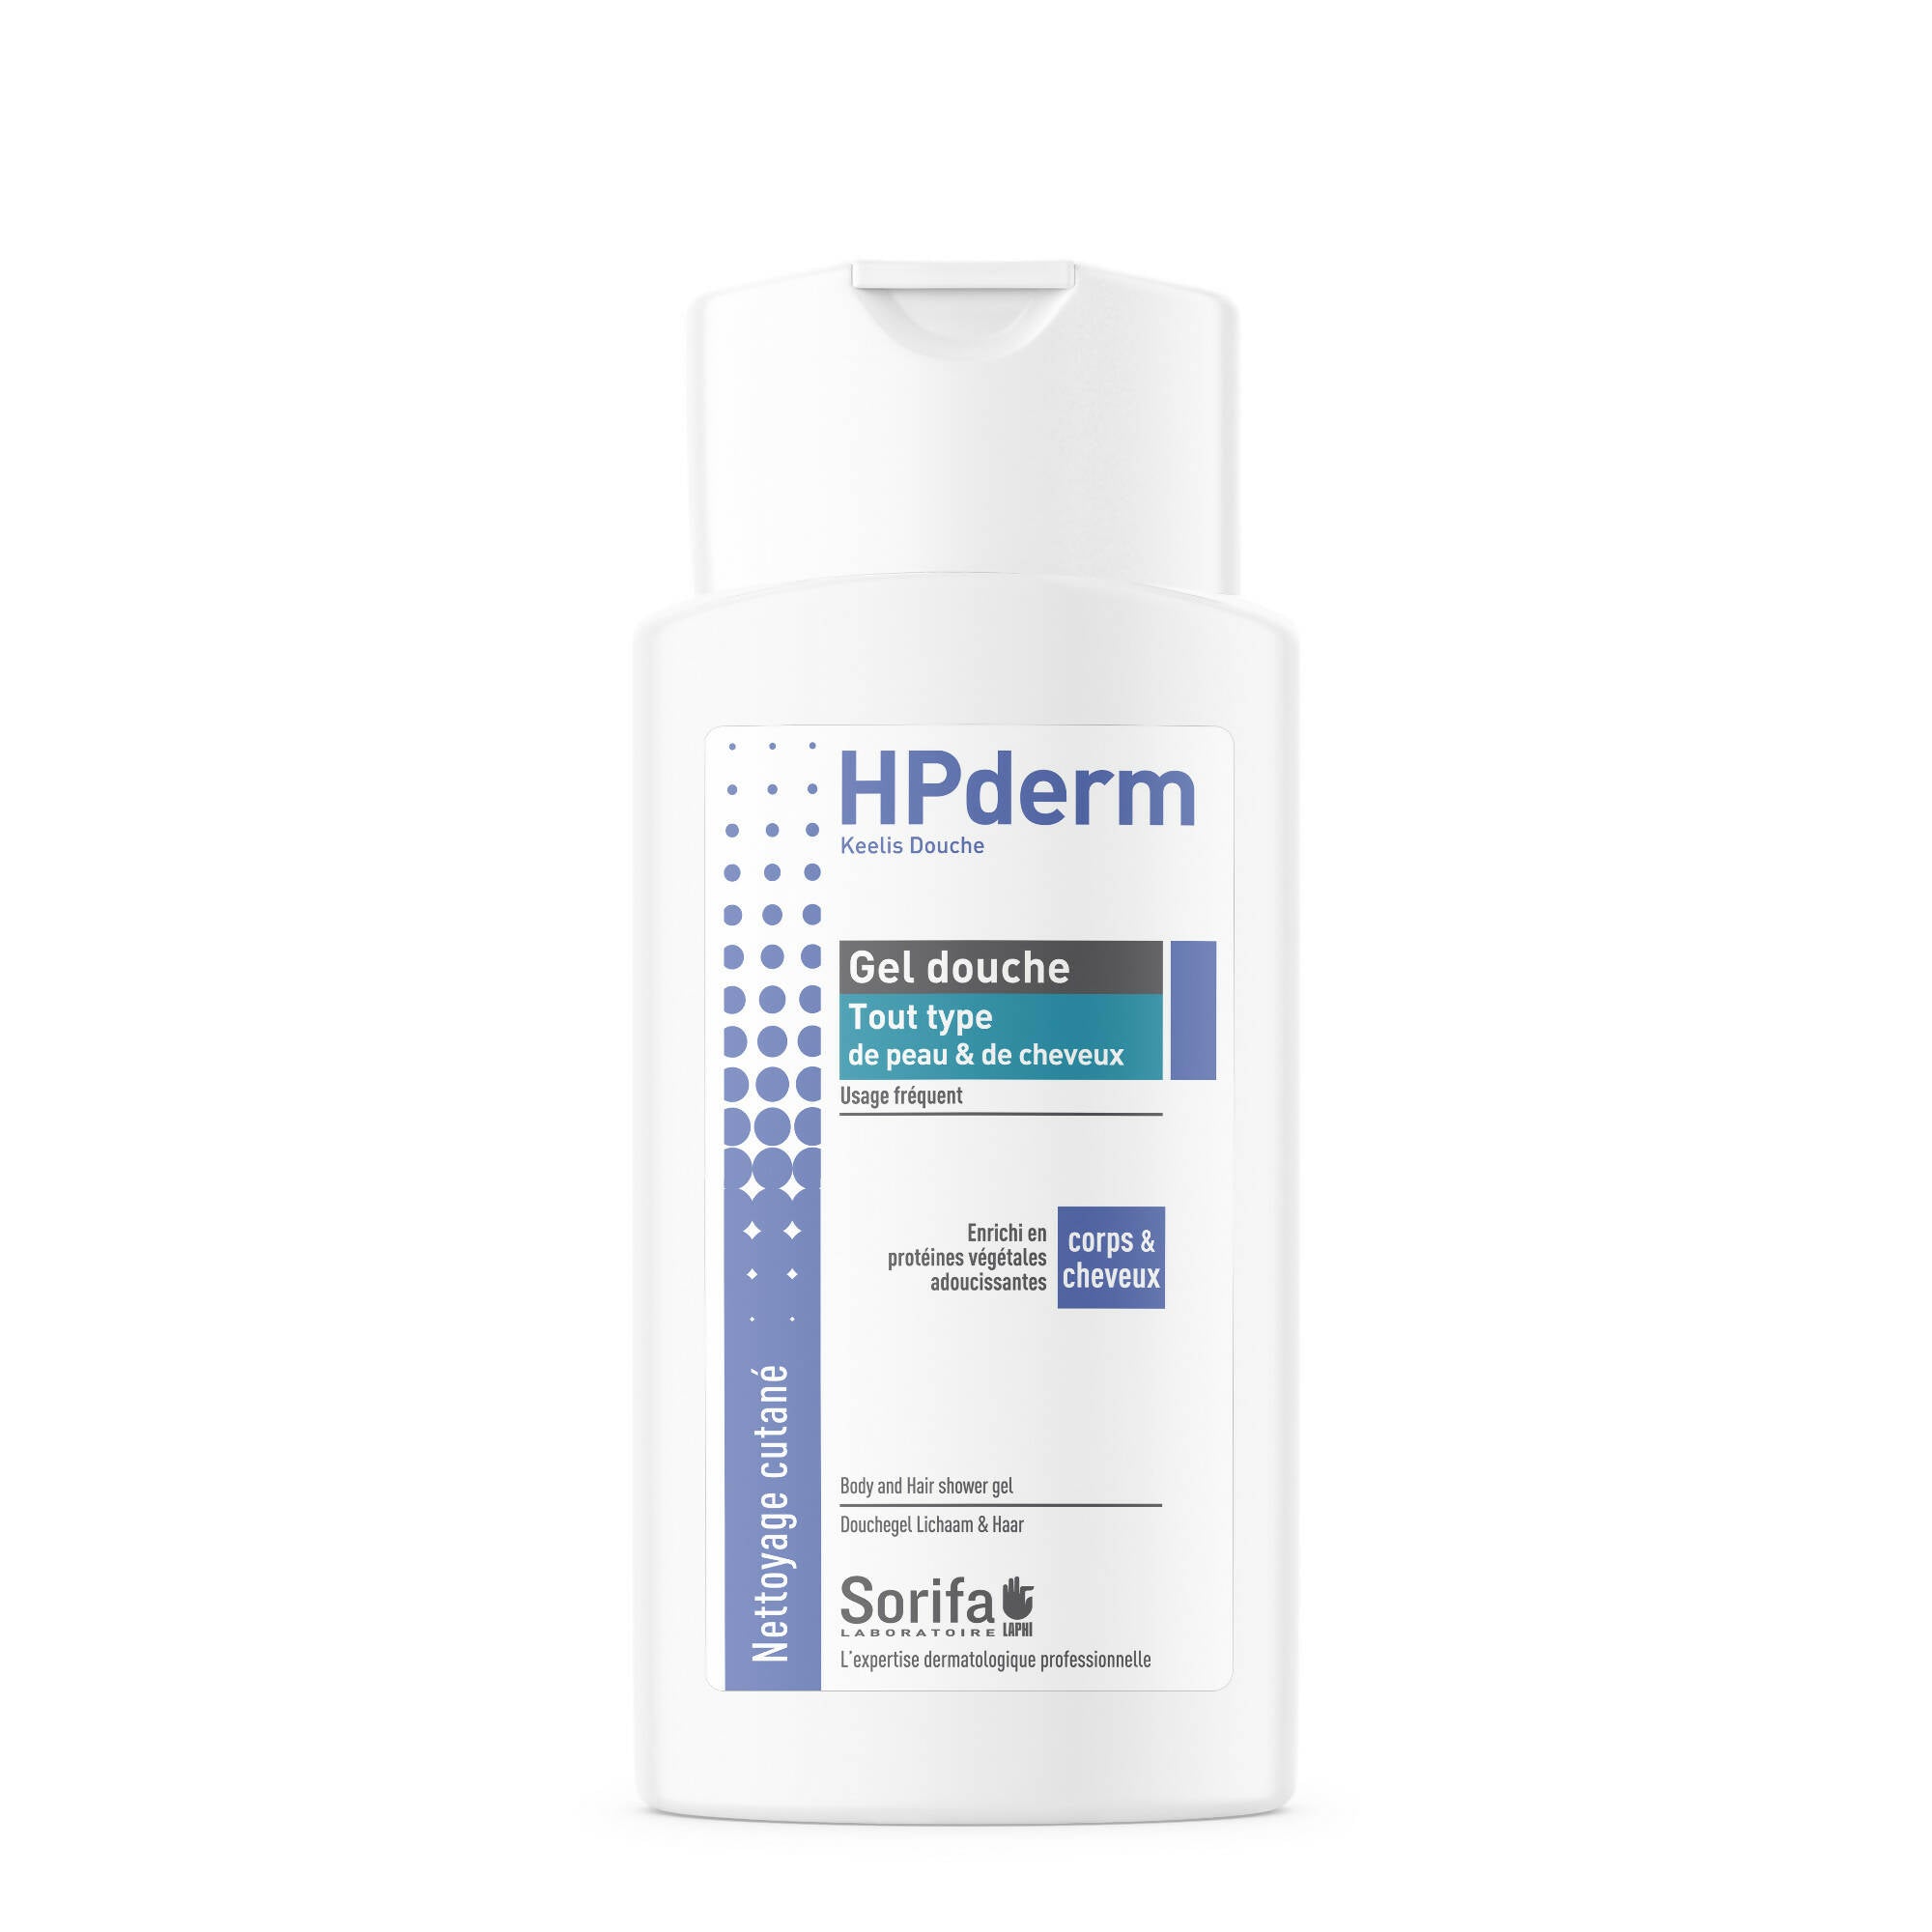 SORIFA - Complete box of 30 - HPderm Shower gel - 2 in 1 body and hair - Dermo-protective - All skin and hair types - with oat proteins - Frequent use - Neutral pH, soap-free - 200 ml bottle - 0